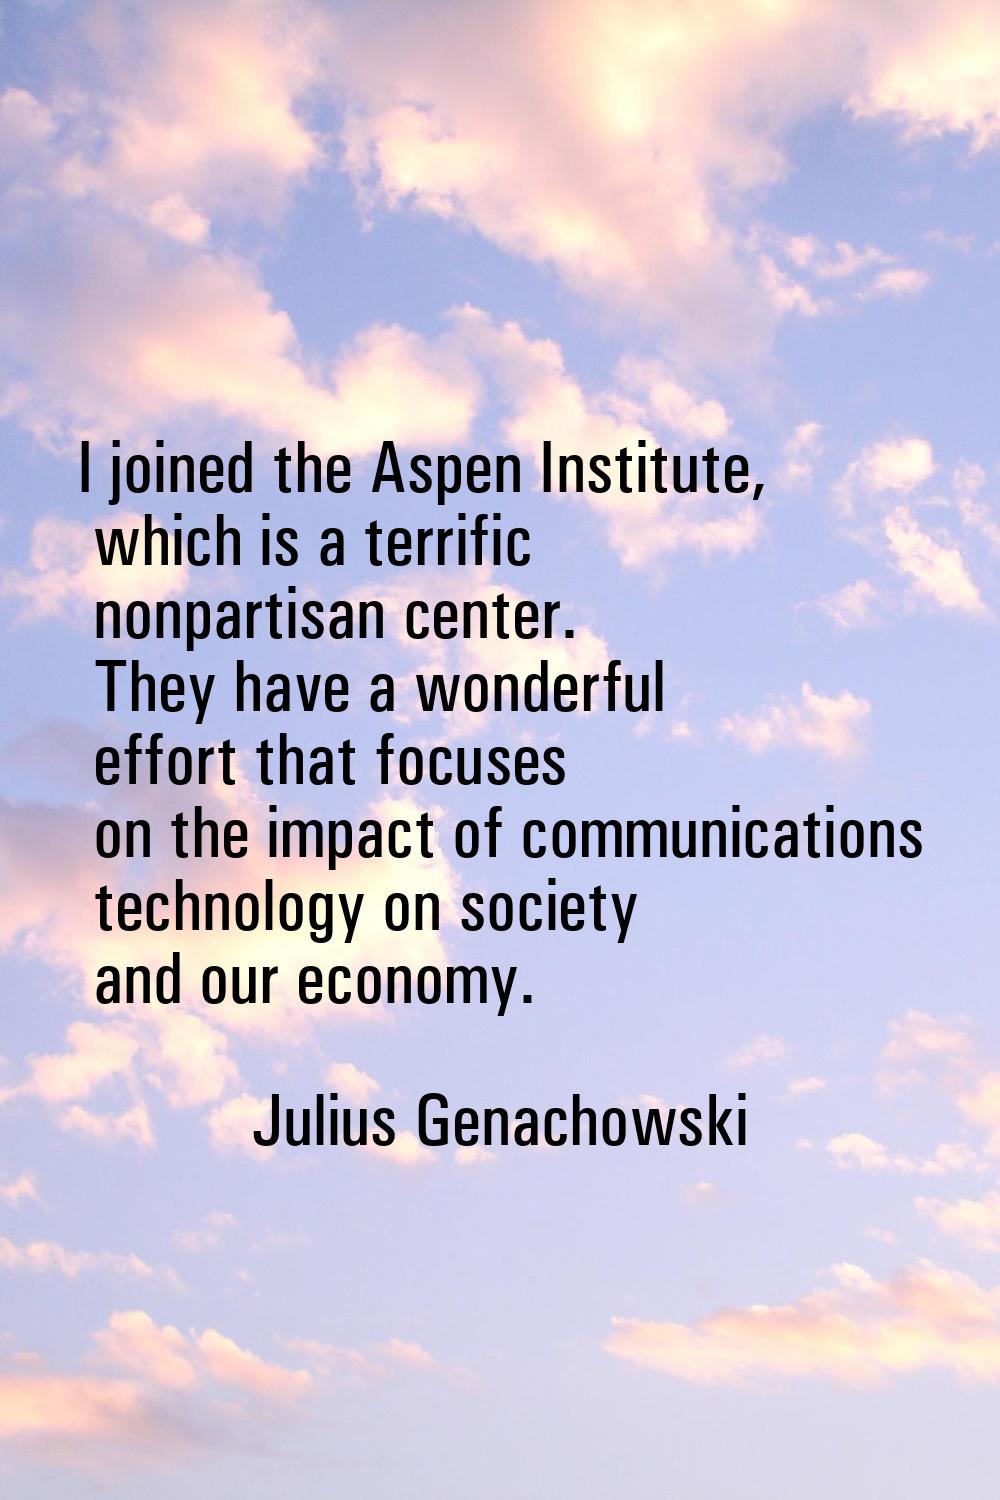 I joined the Aspen Institute, which is a terrific nonpartisan center. They have a wonderful effort 